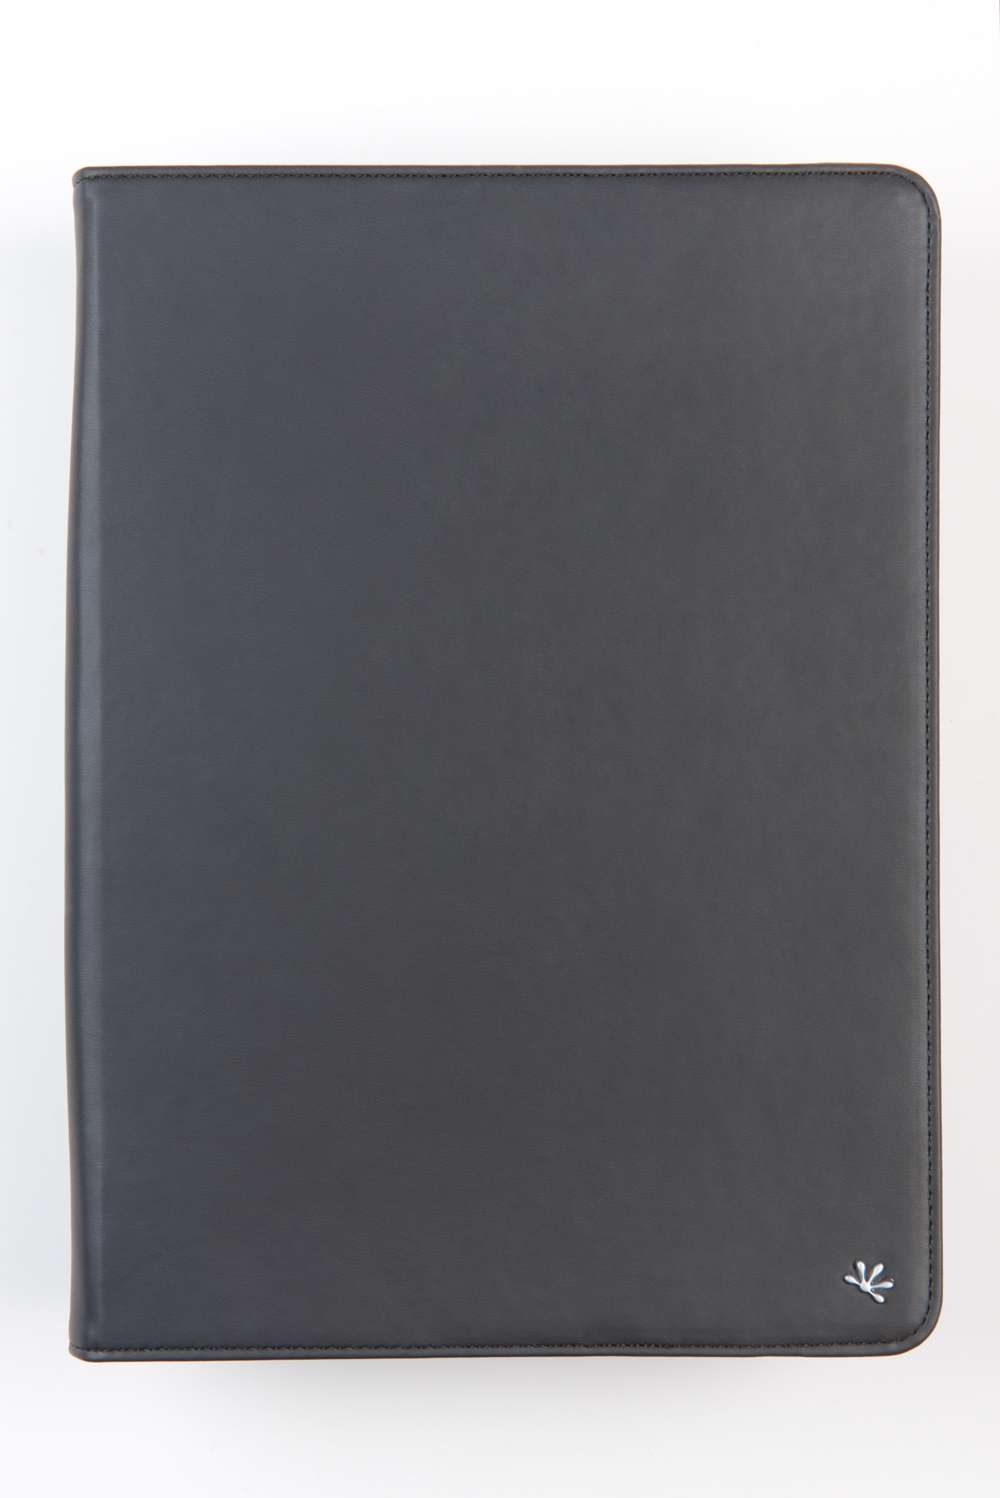 Universal e-reader/tablet case - 10 inch devices